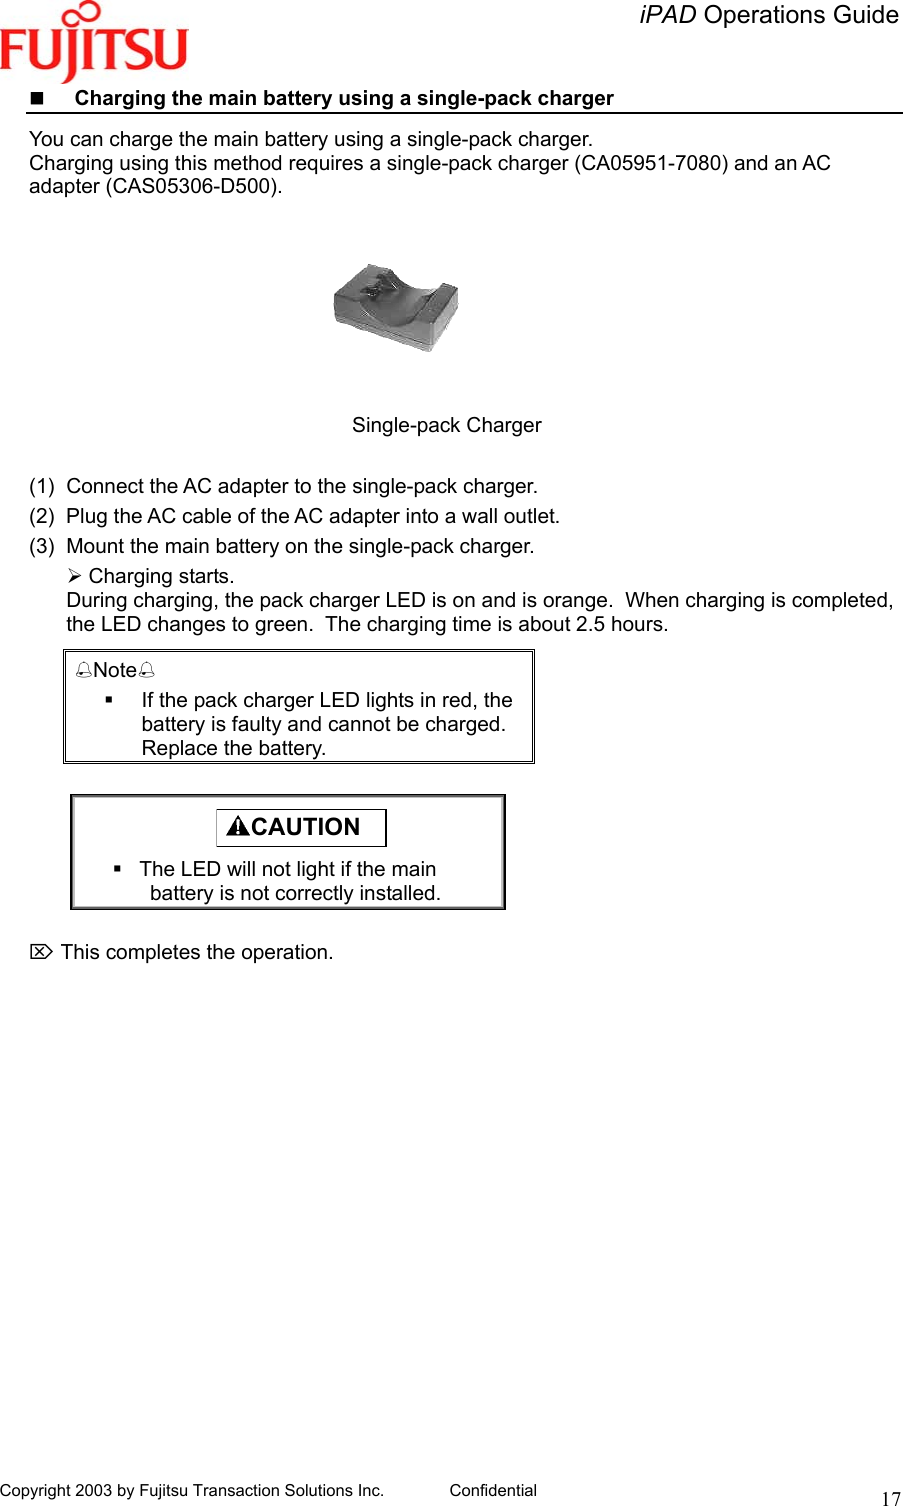   iPAD Operations Guide   Copyright 2003 by Fujitsu Transaction Solutions Inc. Confidential  17   Charging the main battery using a single-pack charger  You can charge the main battery using a single-pack charger. Charging using this method requires a single-pack charger (CA05951-7080) and an AC adapter (CAS05306-D500).                                               Single-pack Charger       (1)  Connect the AC adapter to the single-pack charger. (2)  Plug the AC cable of the AC adapter into a wall outlet. (3)  Mount the main battery on the single-pack charger.  Charging starts. During charging, the pack charger LED is on and is orange.  When charging is completed, the LED changes to green.  The charging time is about 2.5 hours. Note   If the pack charger LED lights in red, the battery is faulty and cannot be charged.  Replace the battery.        ⌦ This completes the operation.   CAUTION    The LED will not light if the main battery is not correctly installed. 